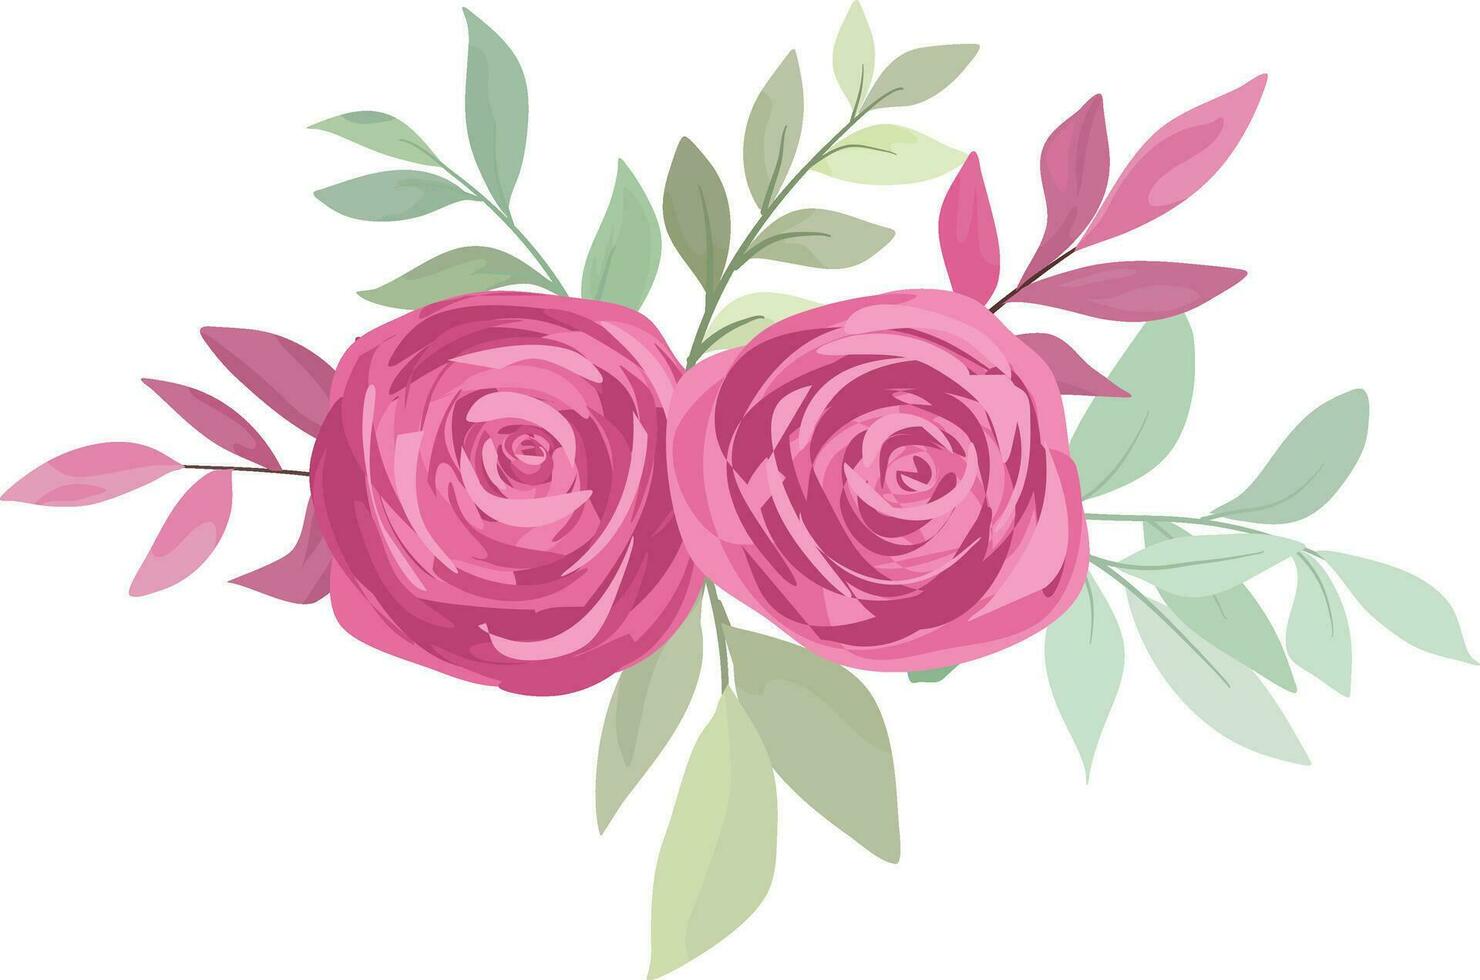 bouquet of flowers with maroon roses vector